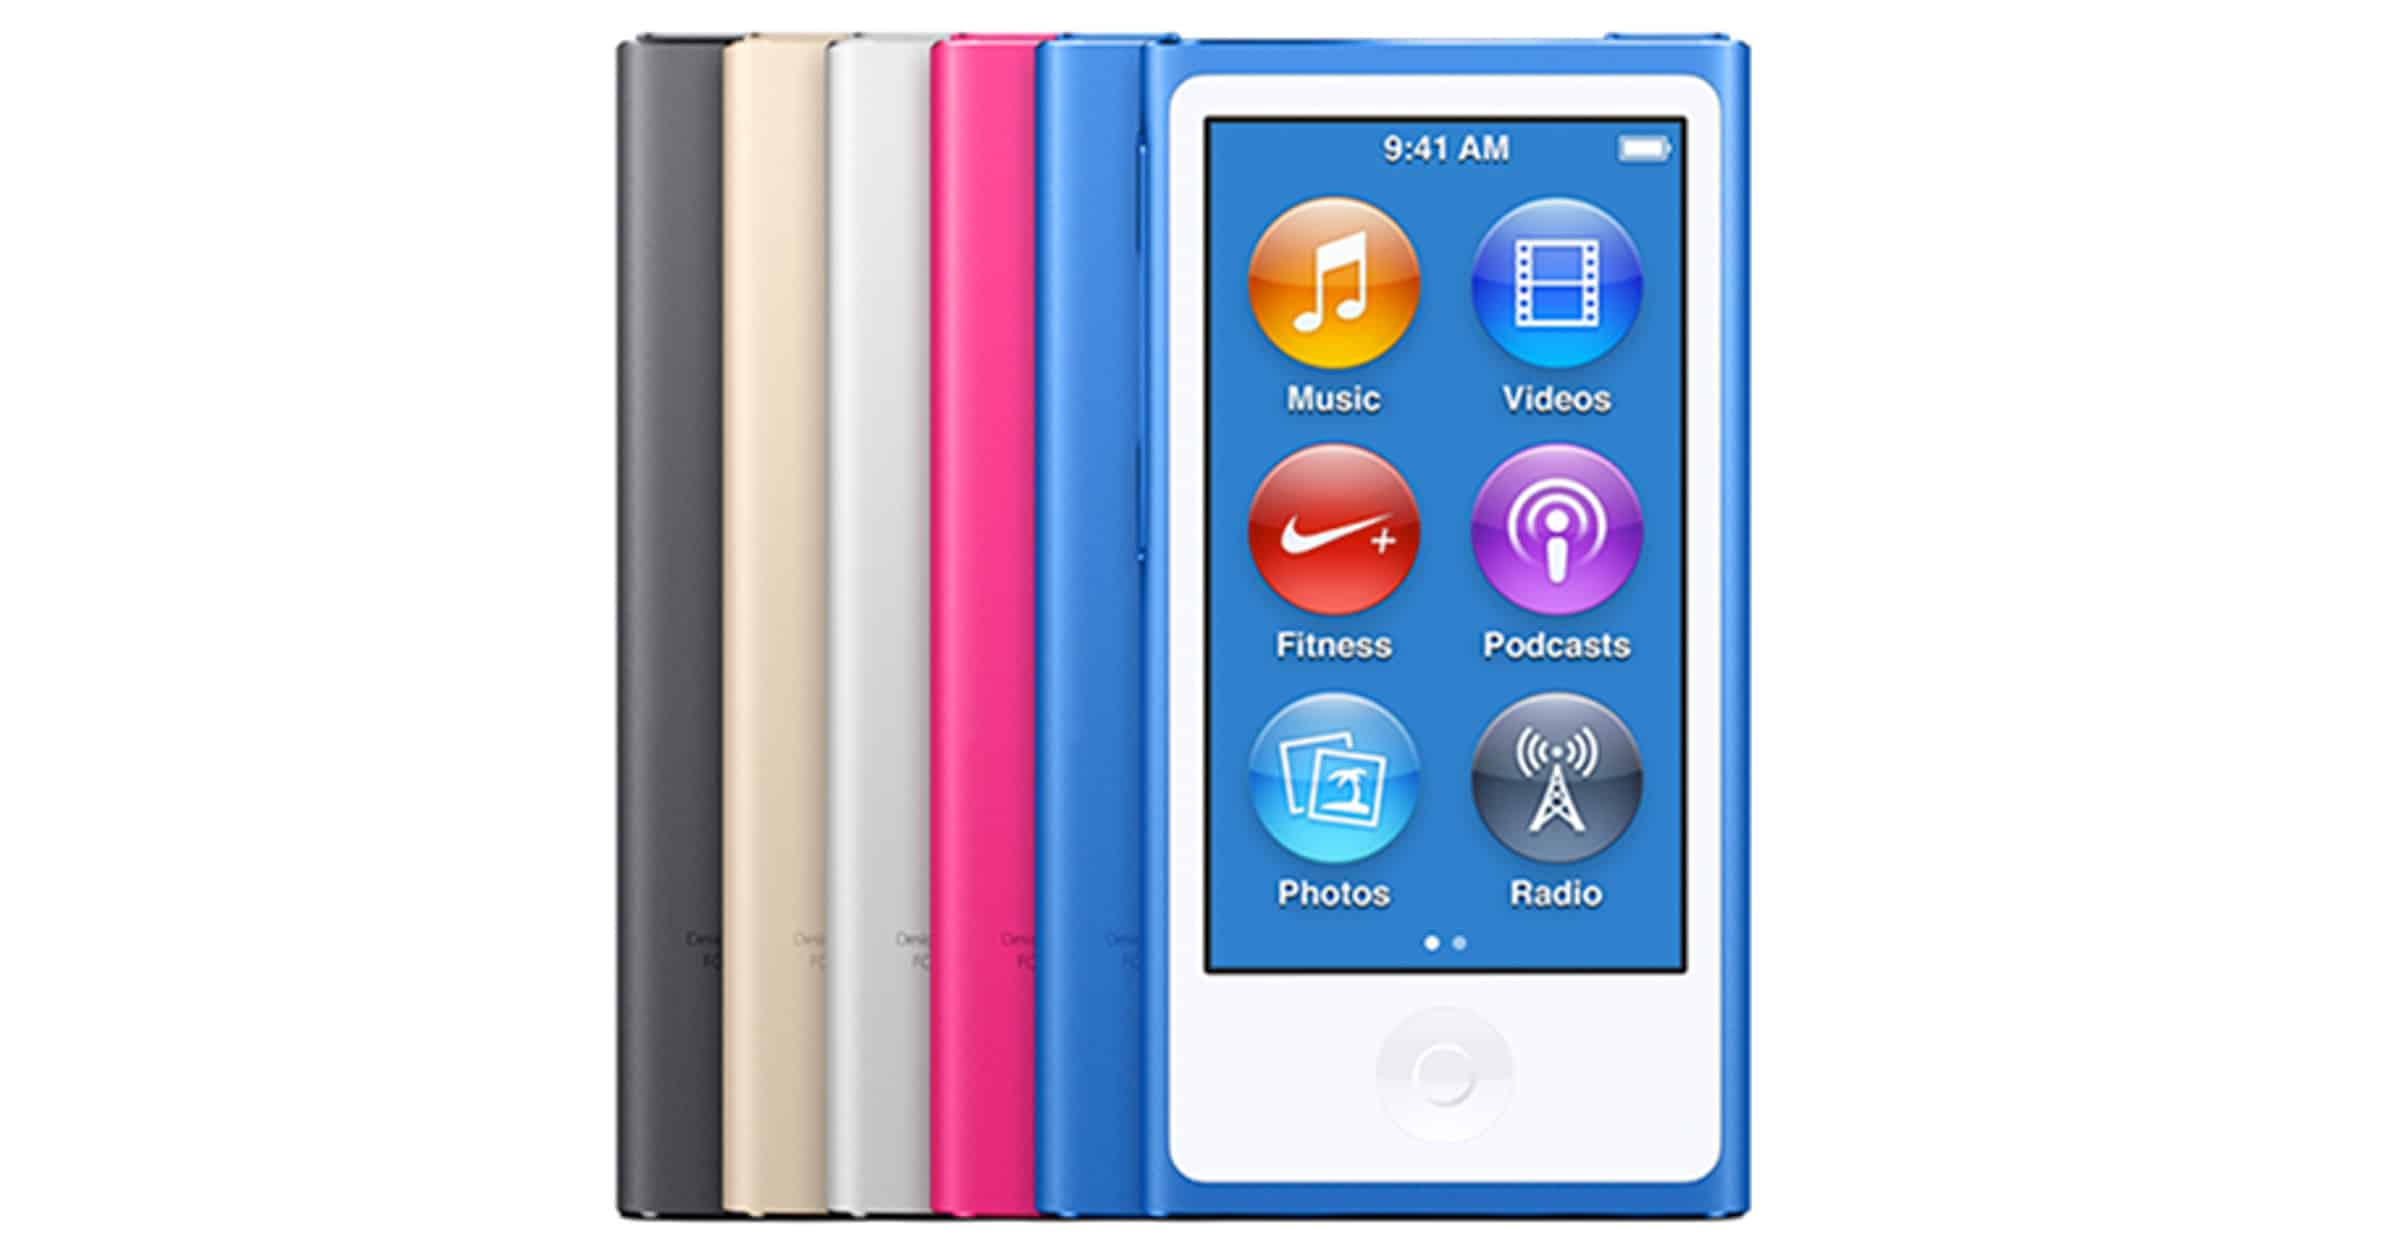 The iPod Nano is Now Officially Vintage